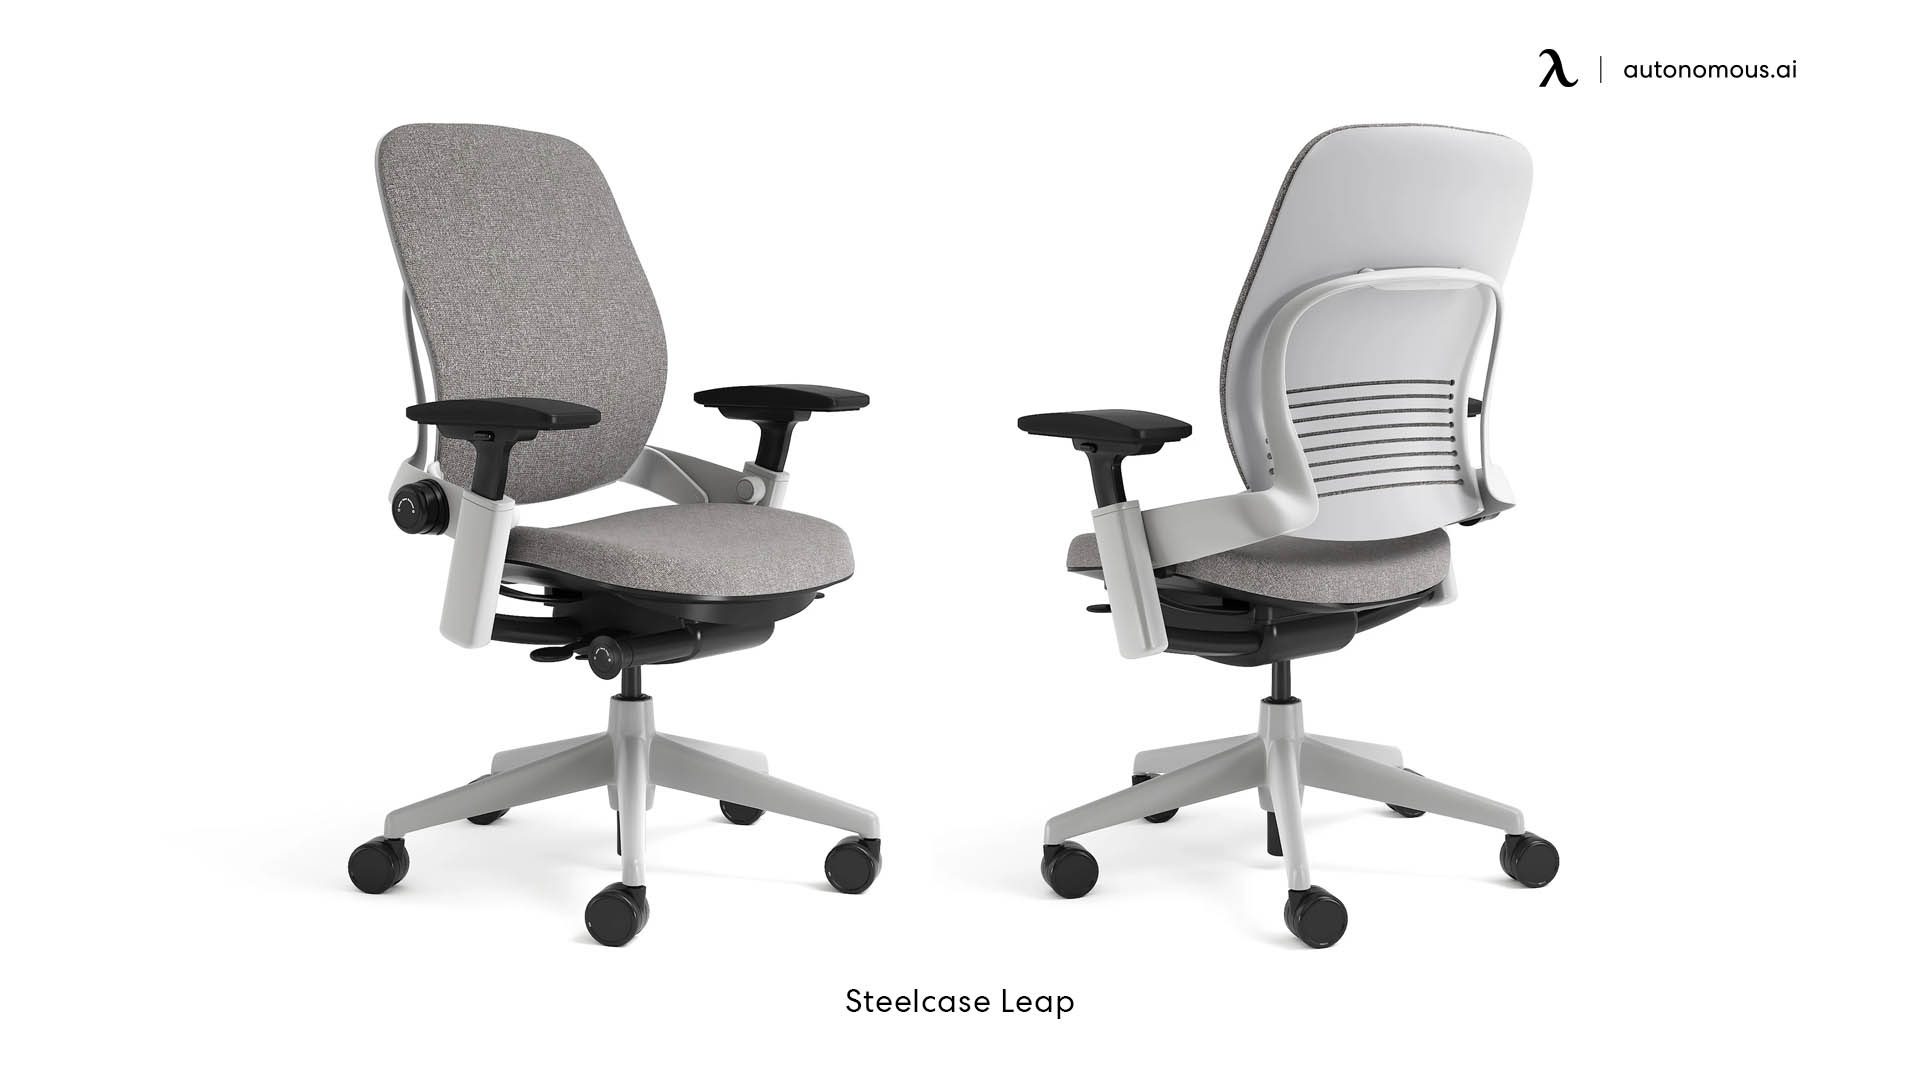 Steelcase Leap durable computer chair